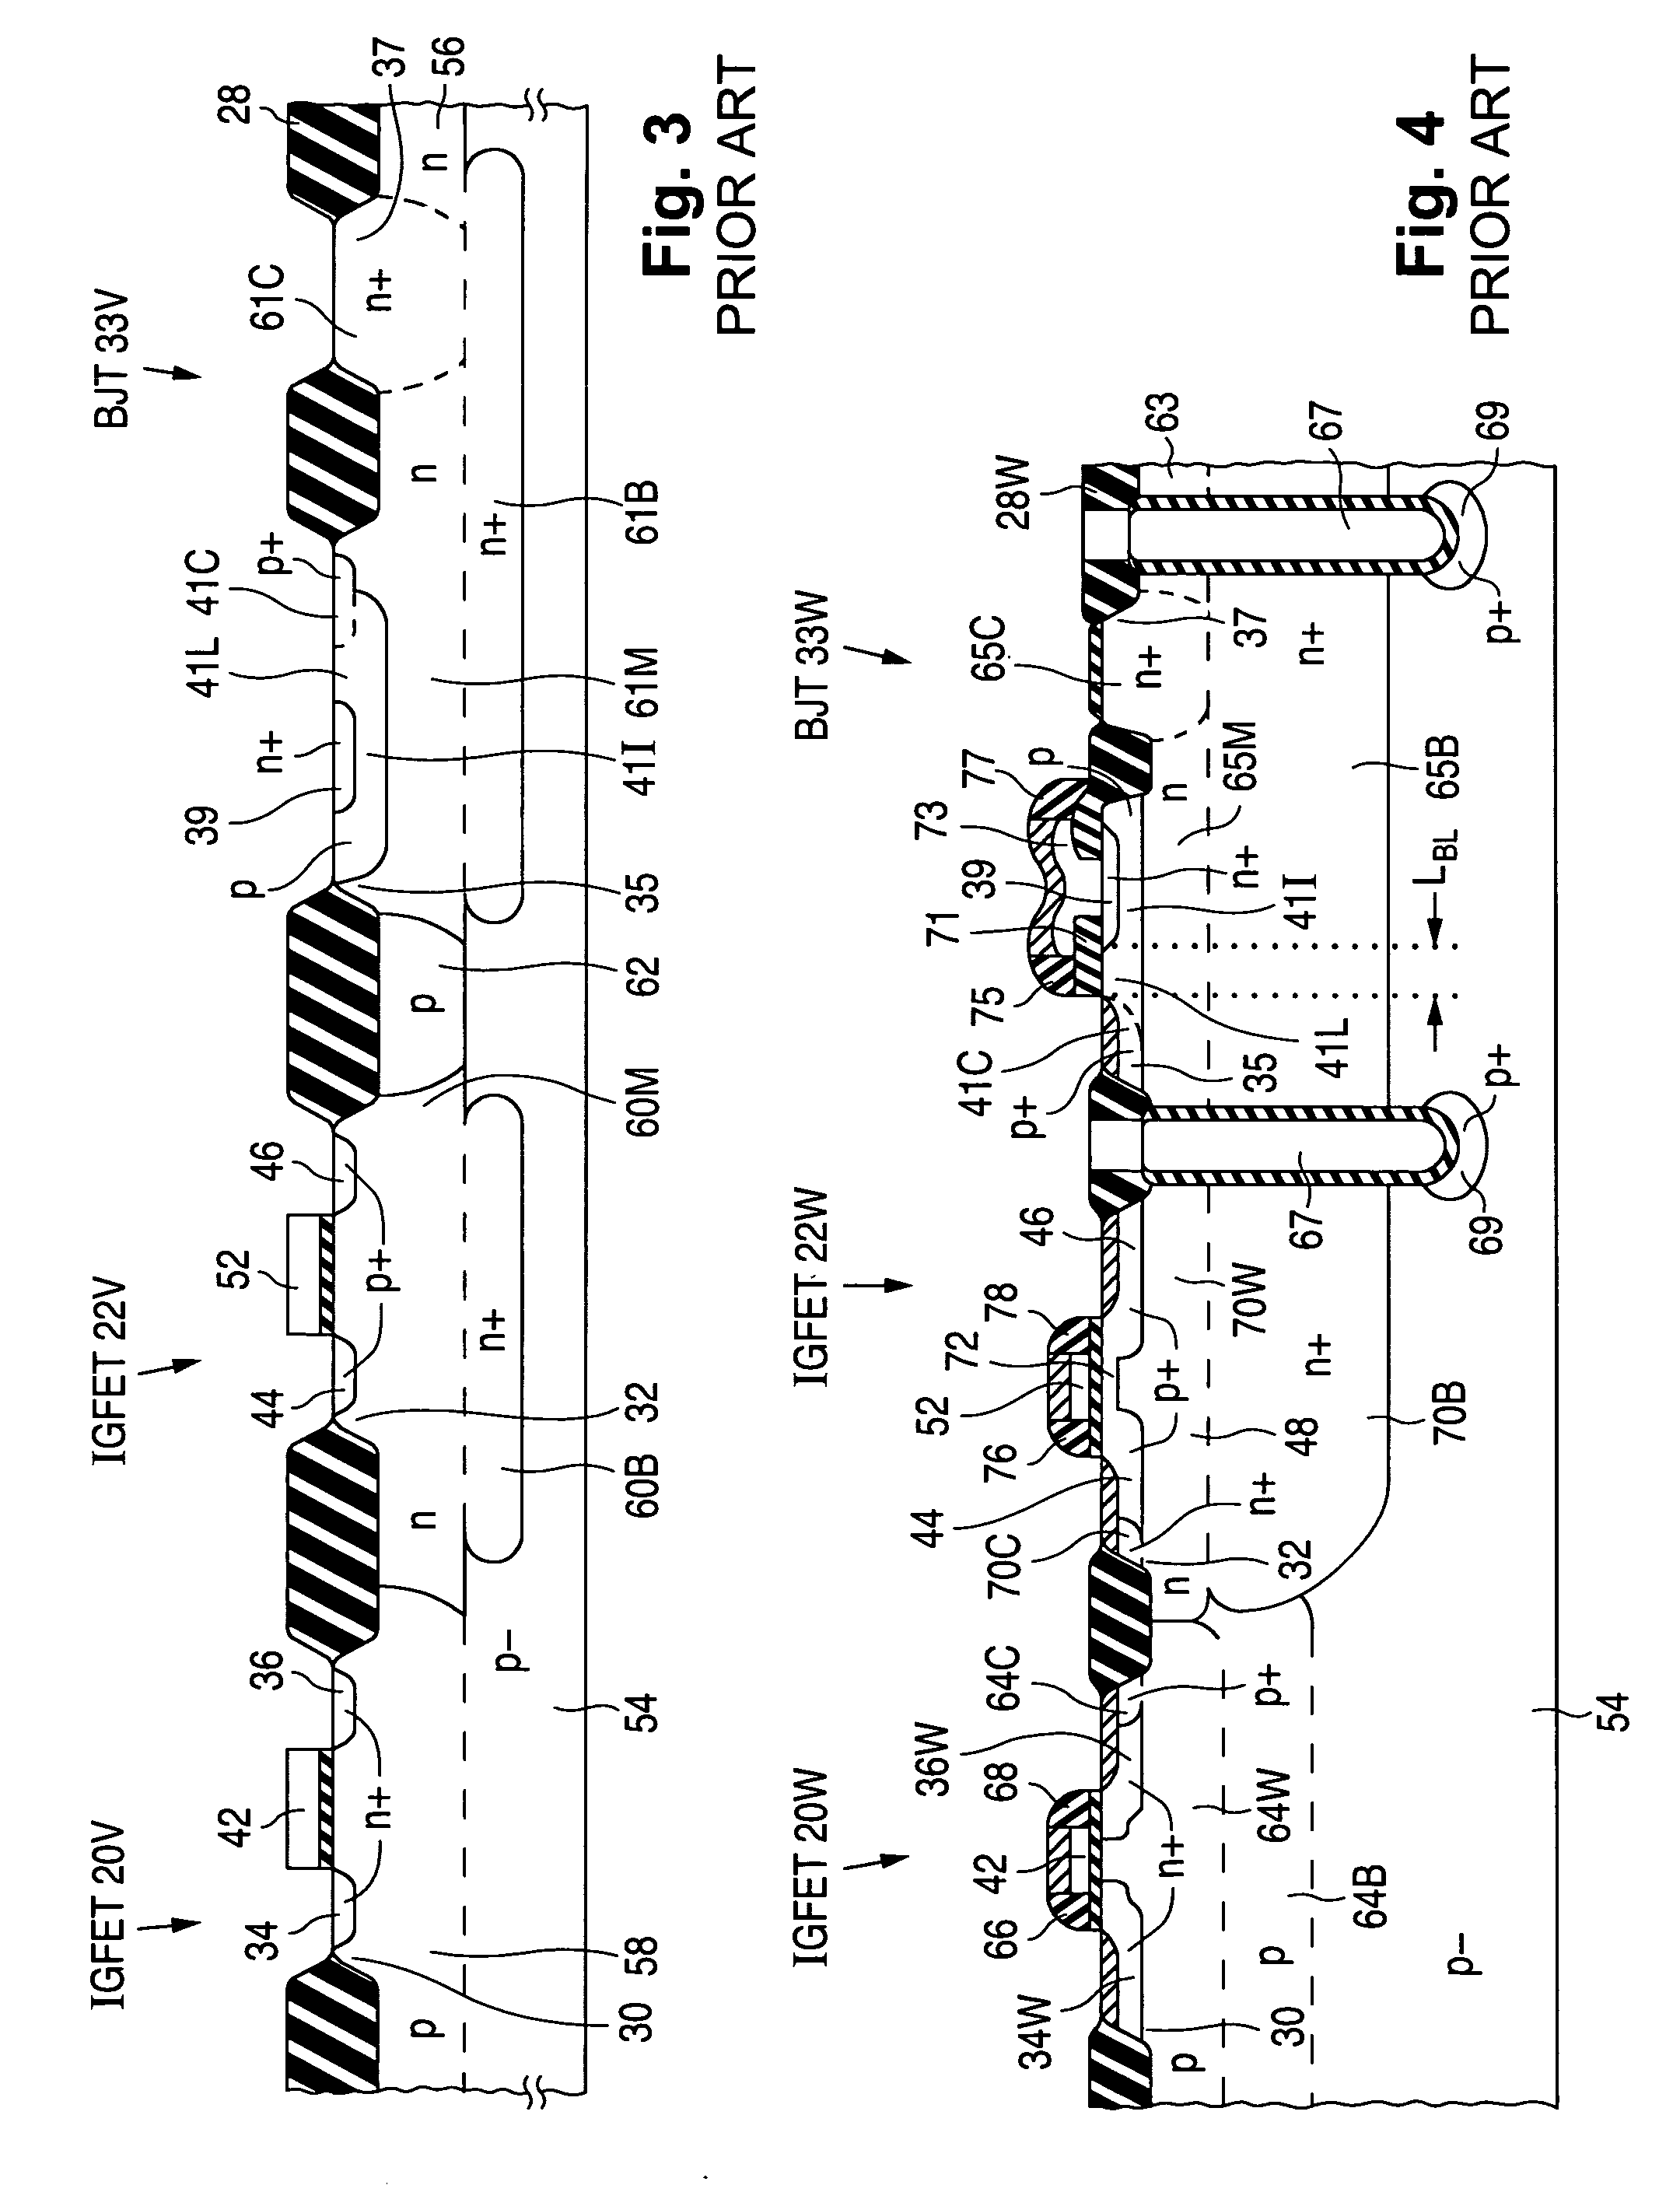 Configuration and fabrication of semiconductor structure having bipolar junction transistor in which non-monocrystalline semiconductor spacing portion controls base-link length